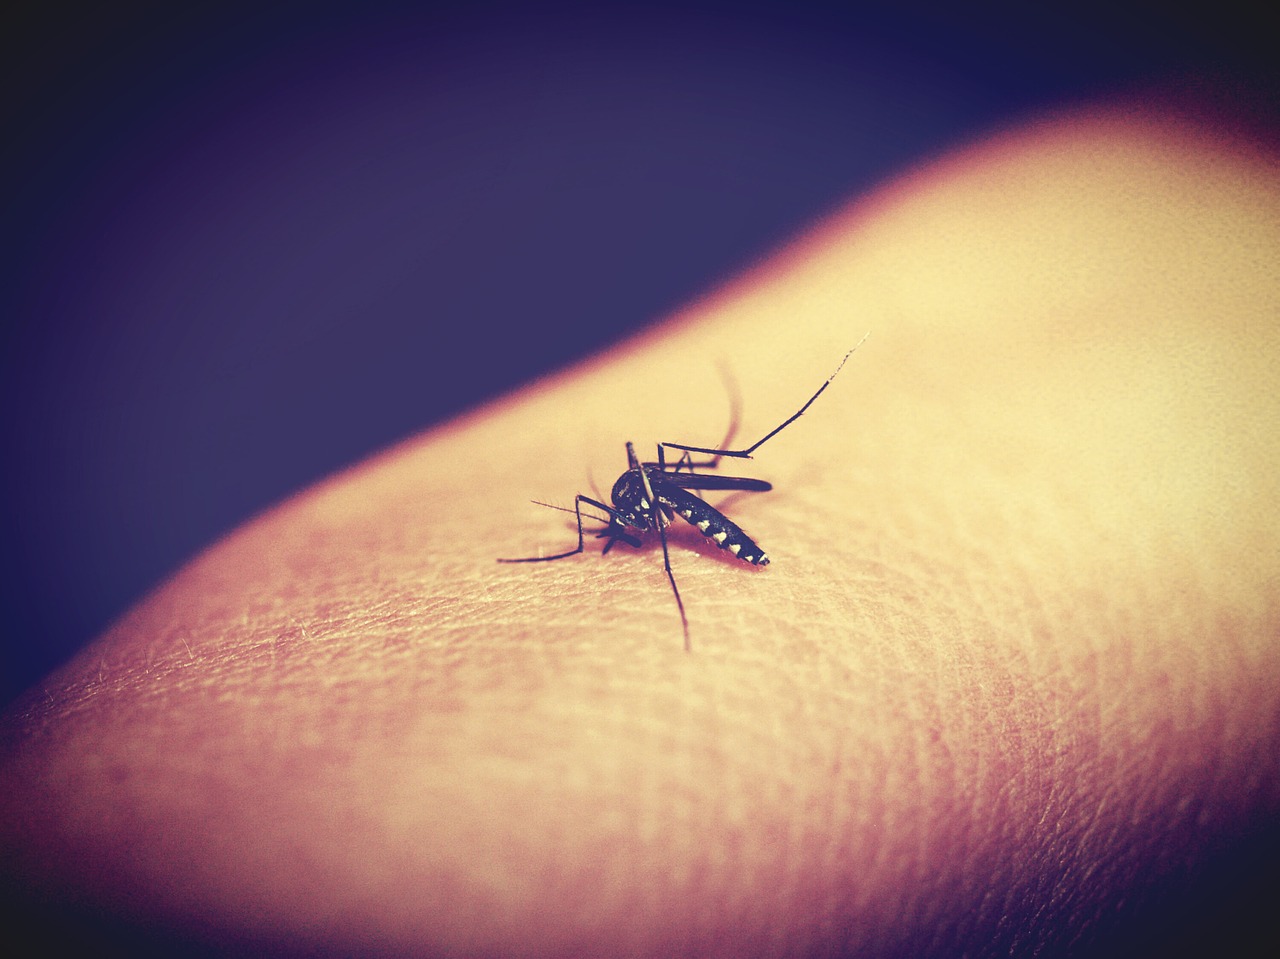 infected mosquito